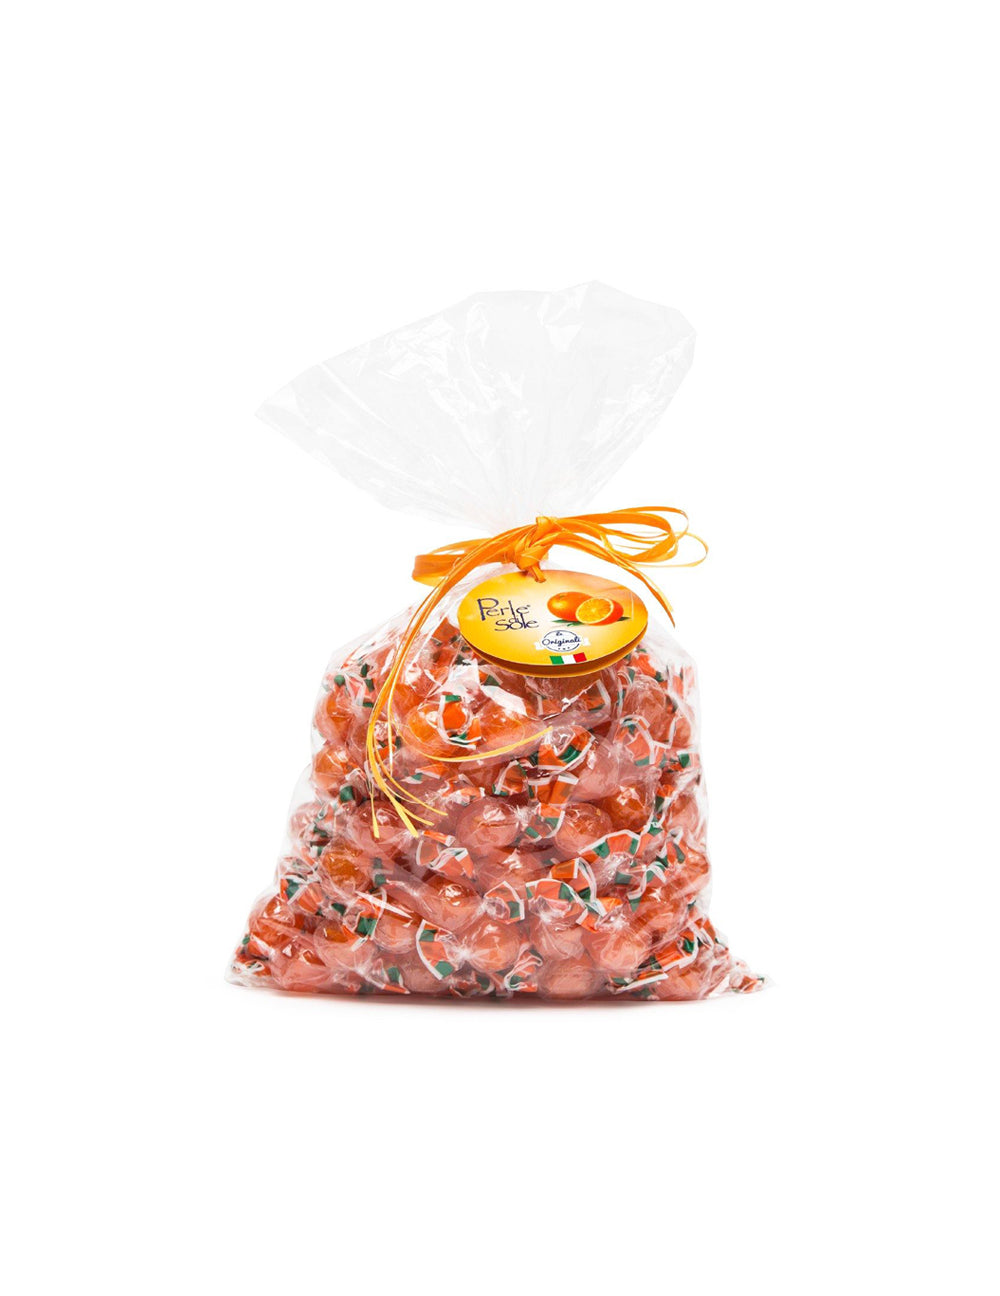 Perle di Sole Orange Drops Made with Essential Oils of Oranges from Sorrento (17.6 oz | 500 g)